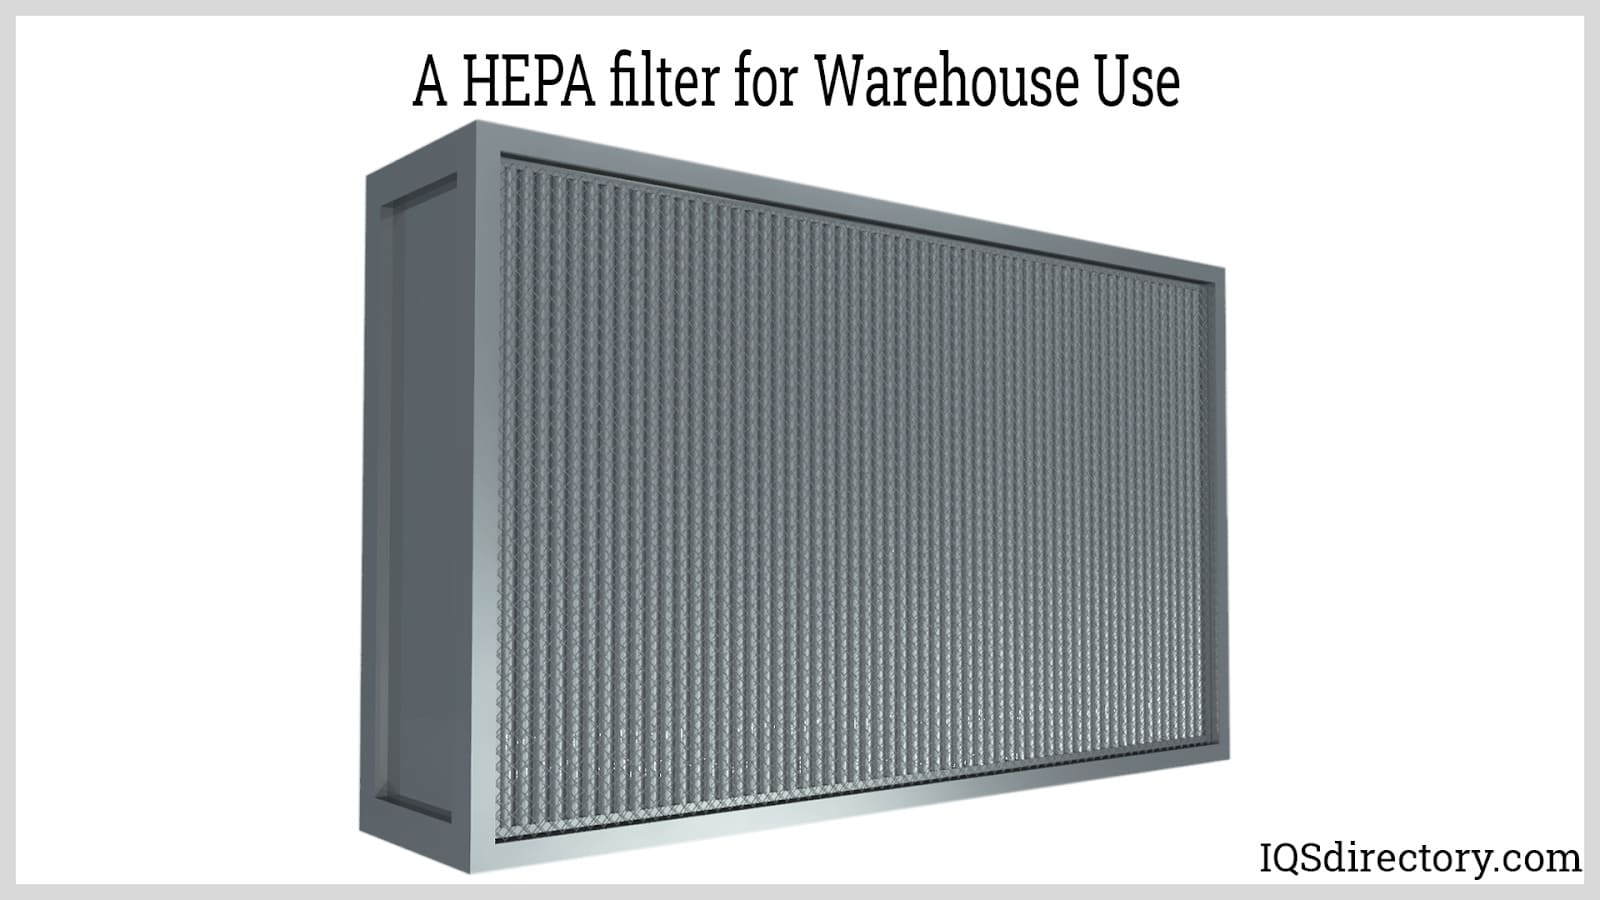 A HEPA filter for Warehouse Use